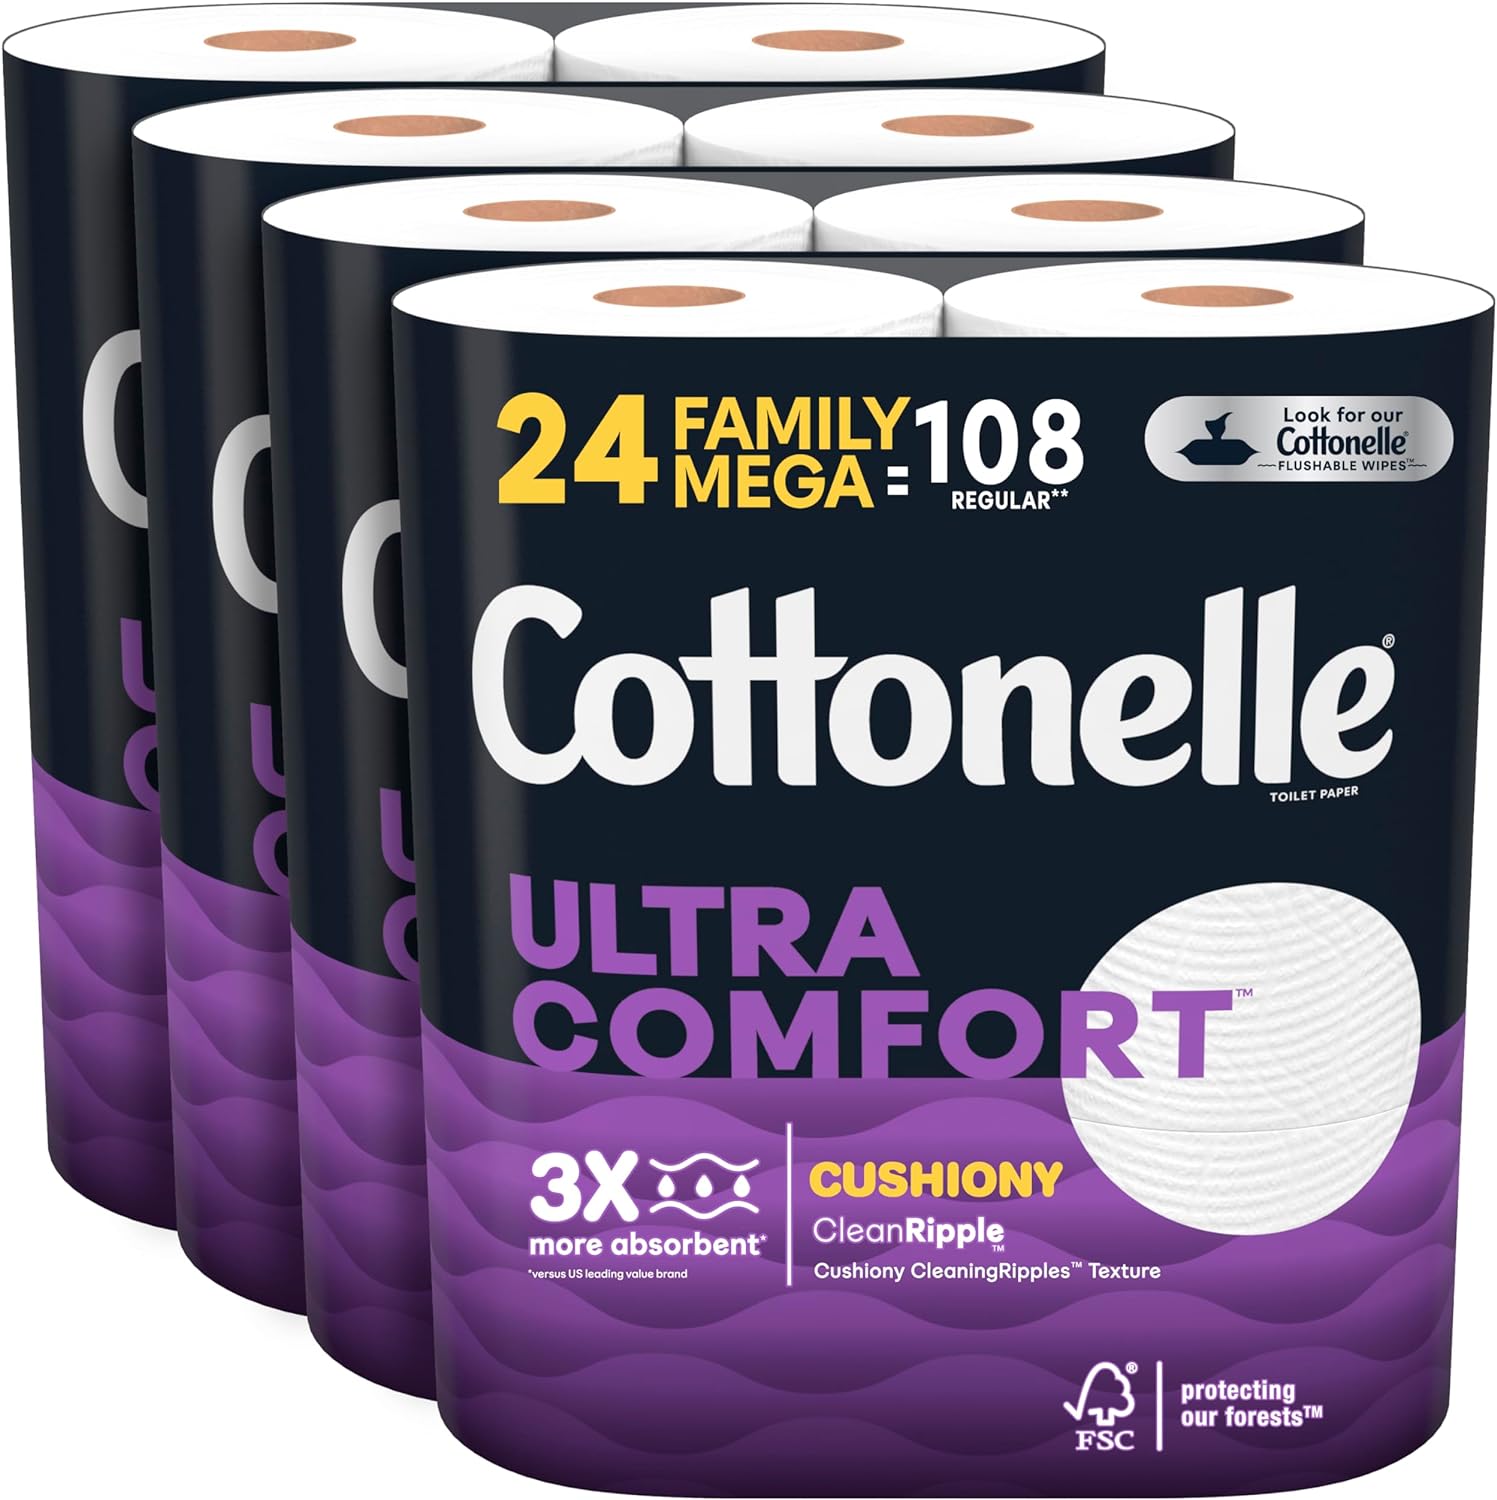 Cottonelle Ultra Comfort Toilet Paper with Cushiony CleaningRipples, 2-Ply, 24 Family Mega Rolls (4 Packs of 6) (24 Family Mega Rolls = 108 Regular Rolls), 325 Sheets per Roll, Packaging May Vary